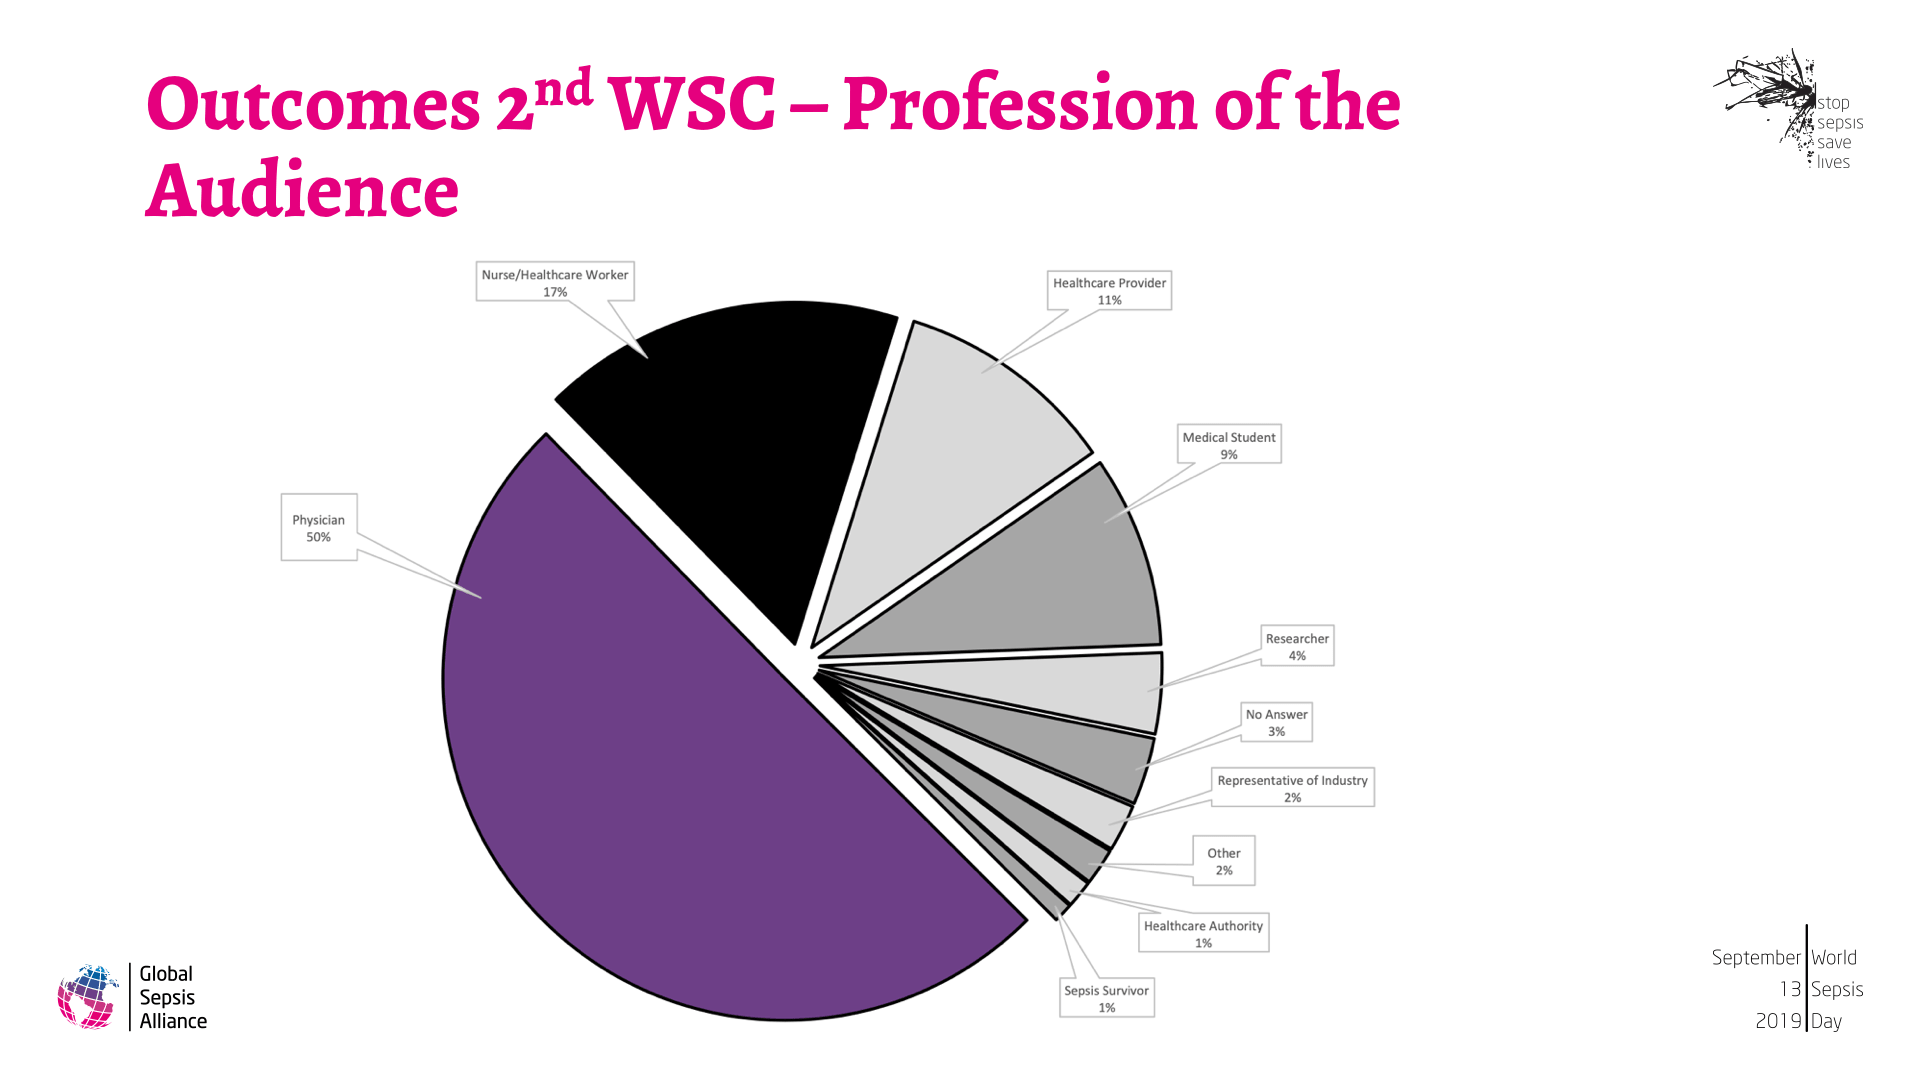 Outcomes 2nd WSC and WSD 2018 4.png